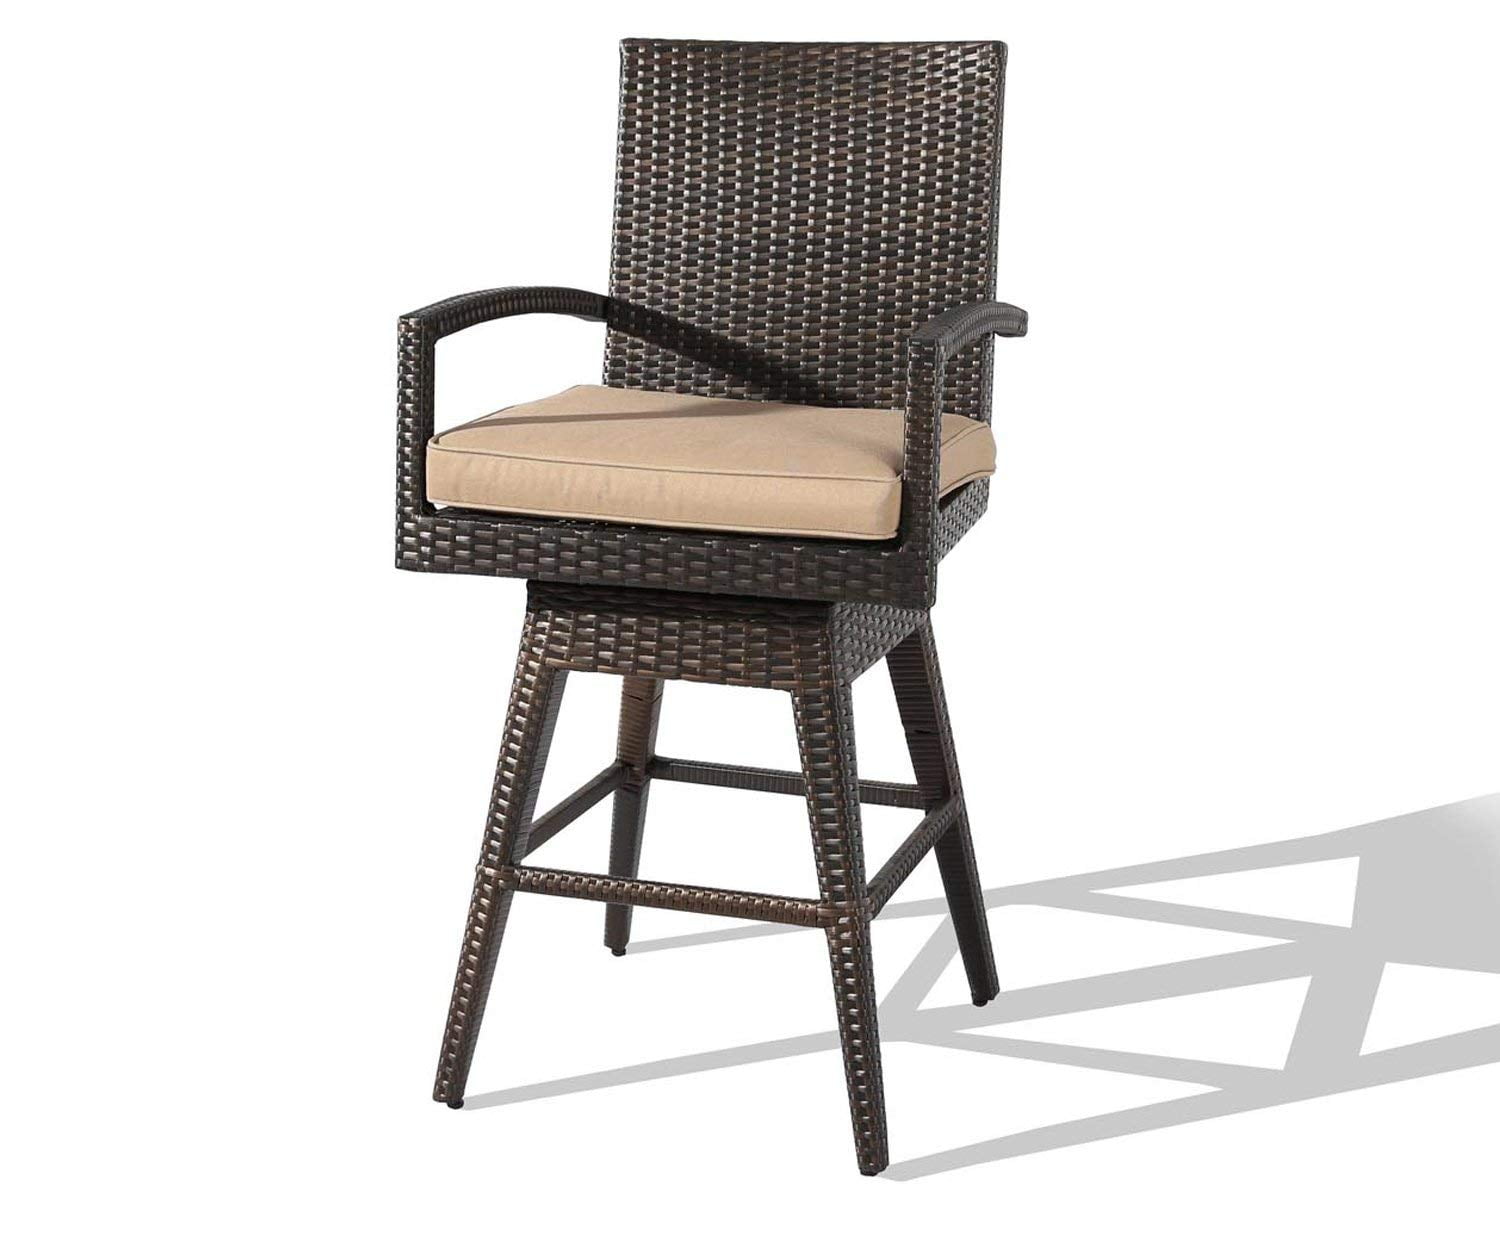 Ulax furniture Outdoor Patio Furniture All-Weather Brown ...